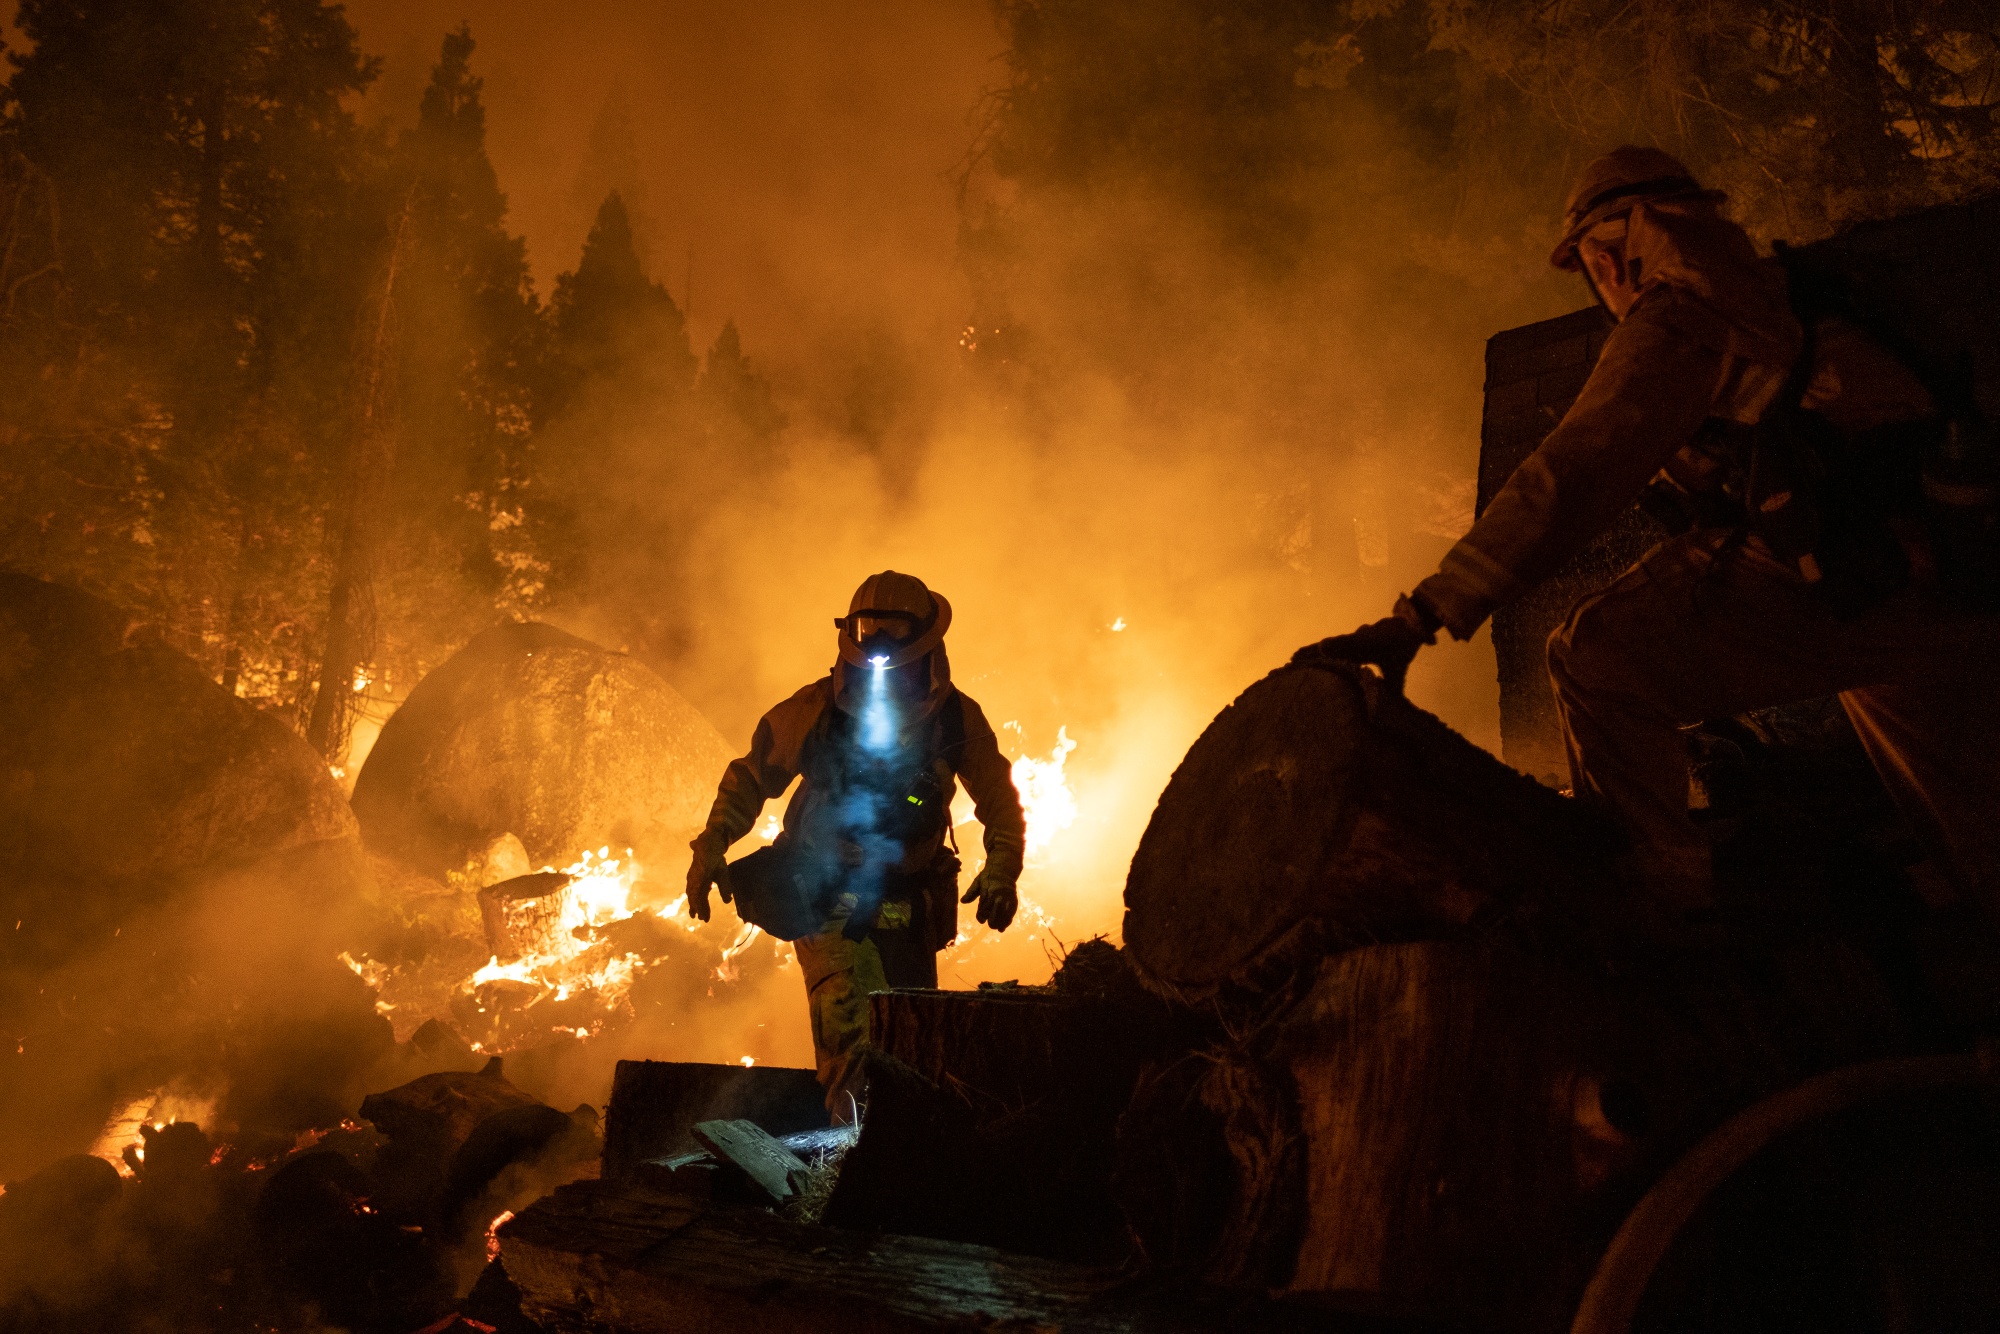 Firefighters attempt to protect a home during the Caldor Fire near Meyers, California, on Aug. 31, 2021.